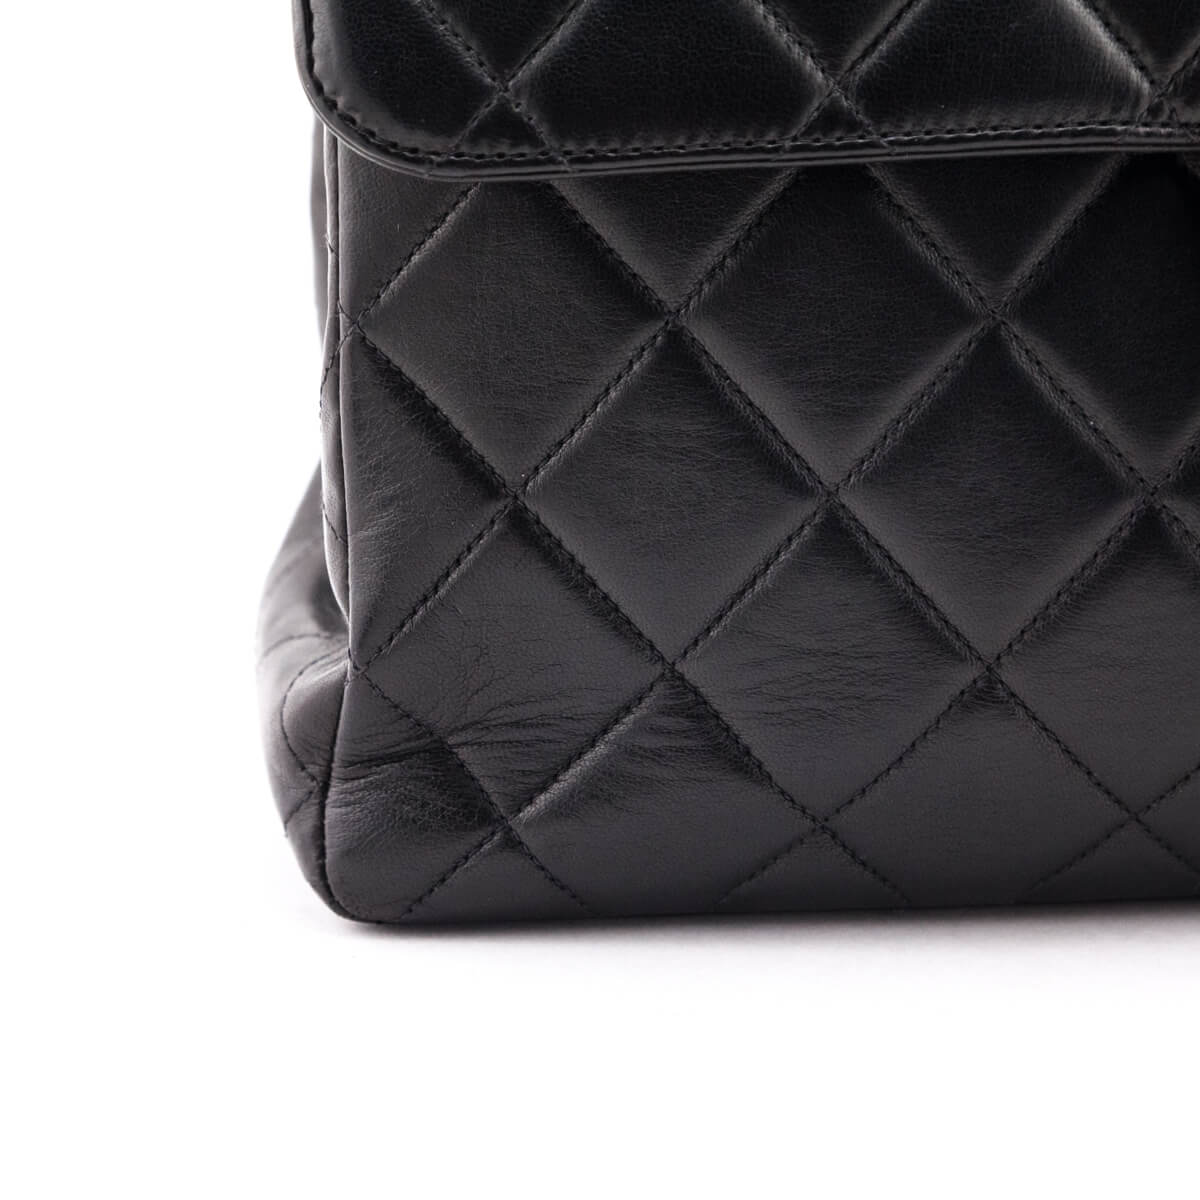 Chanel Black Quilted Lambskin Vintage Jumbo Double Sided Classic Flap Bag - Love that Bag etc - Preowned Authentic Designer Handbags & Preloved Fashions